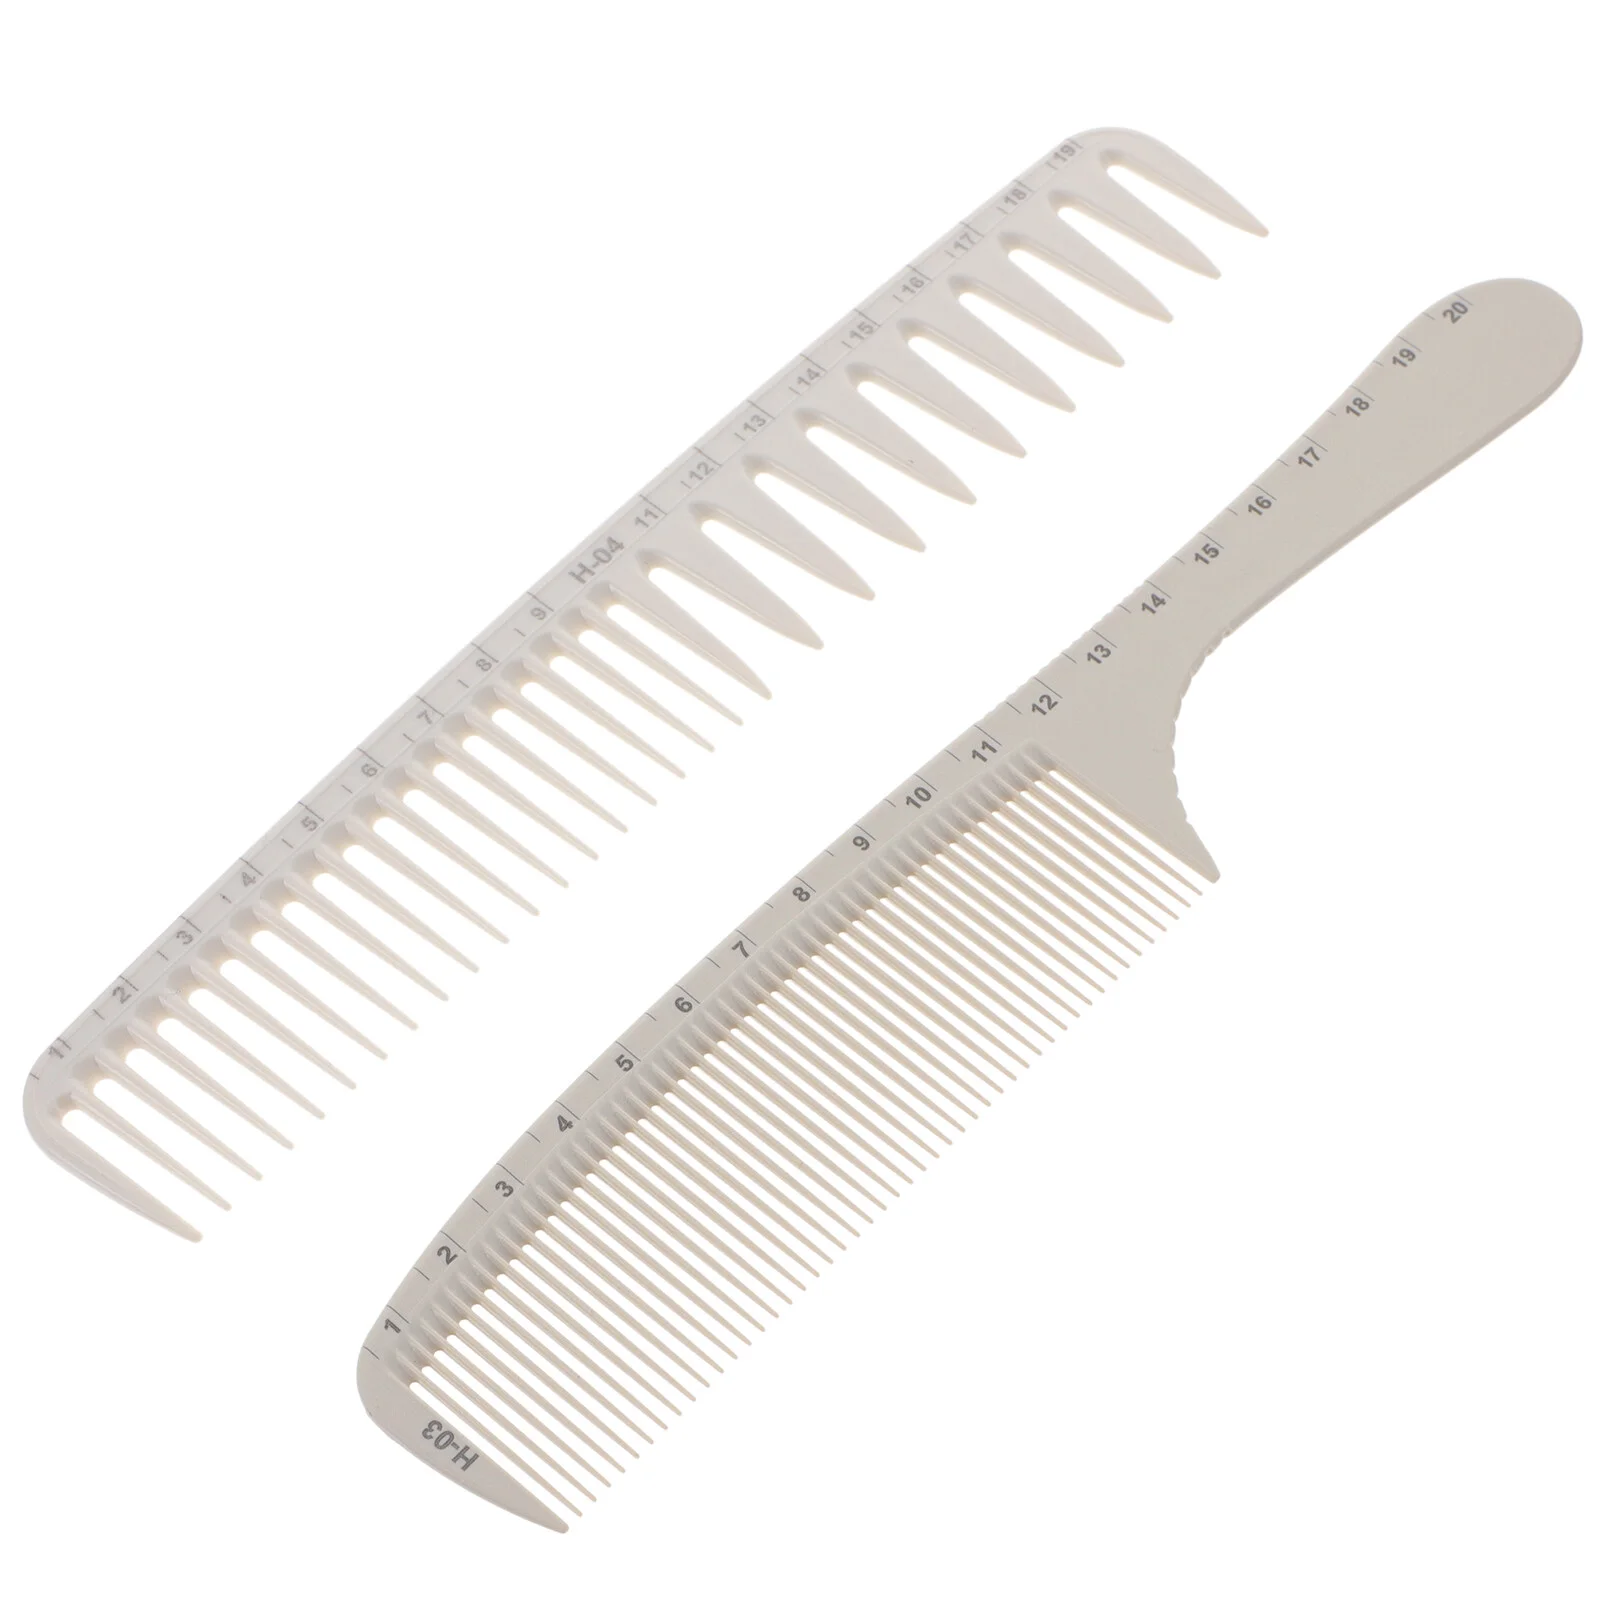 

2 Pcs Graduated Hair Comb Cutting Precision Ruler Combs Bulk Professional Abs Barber Parting Braiding Travel Styling